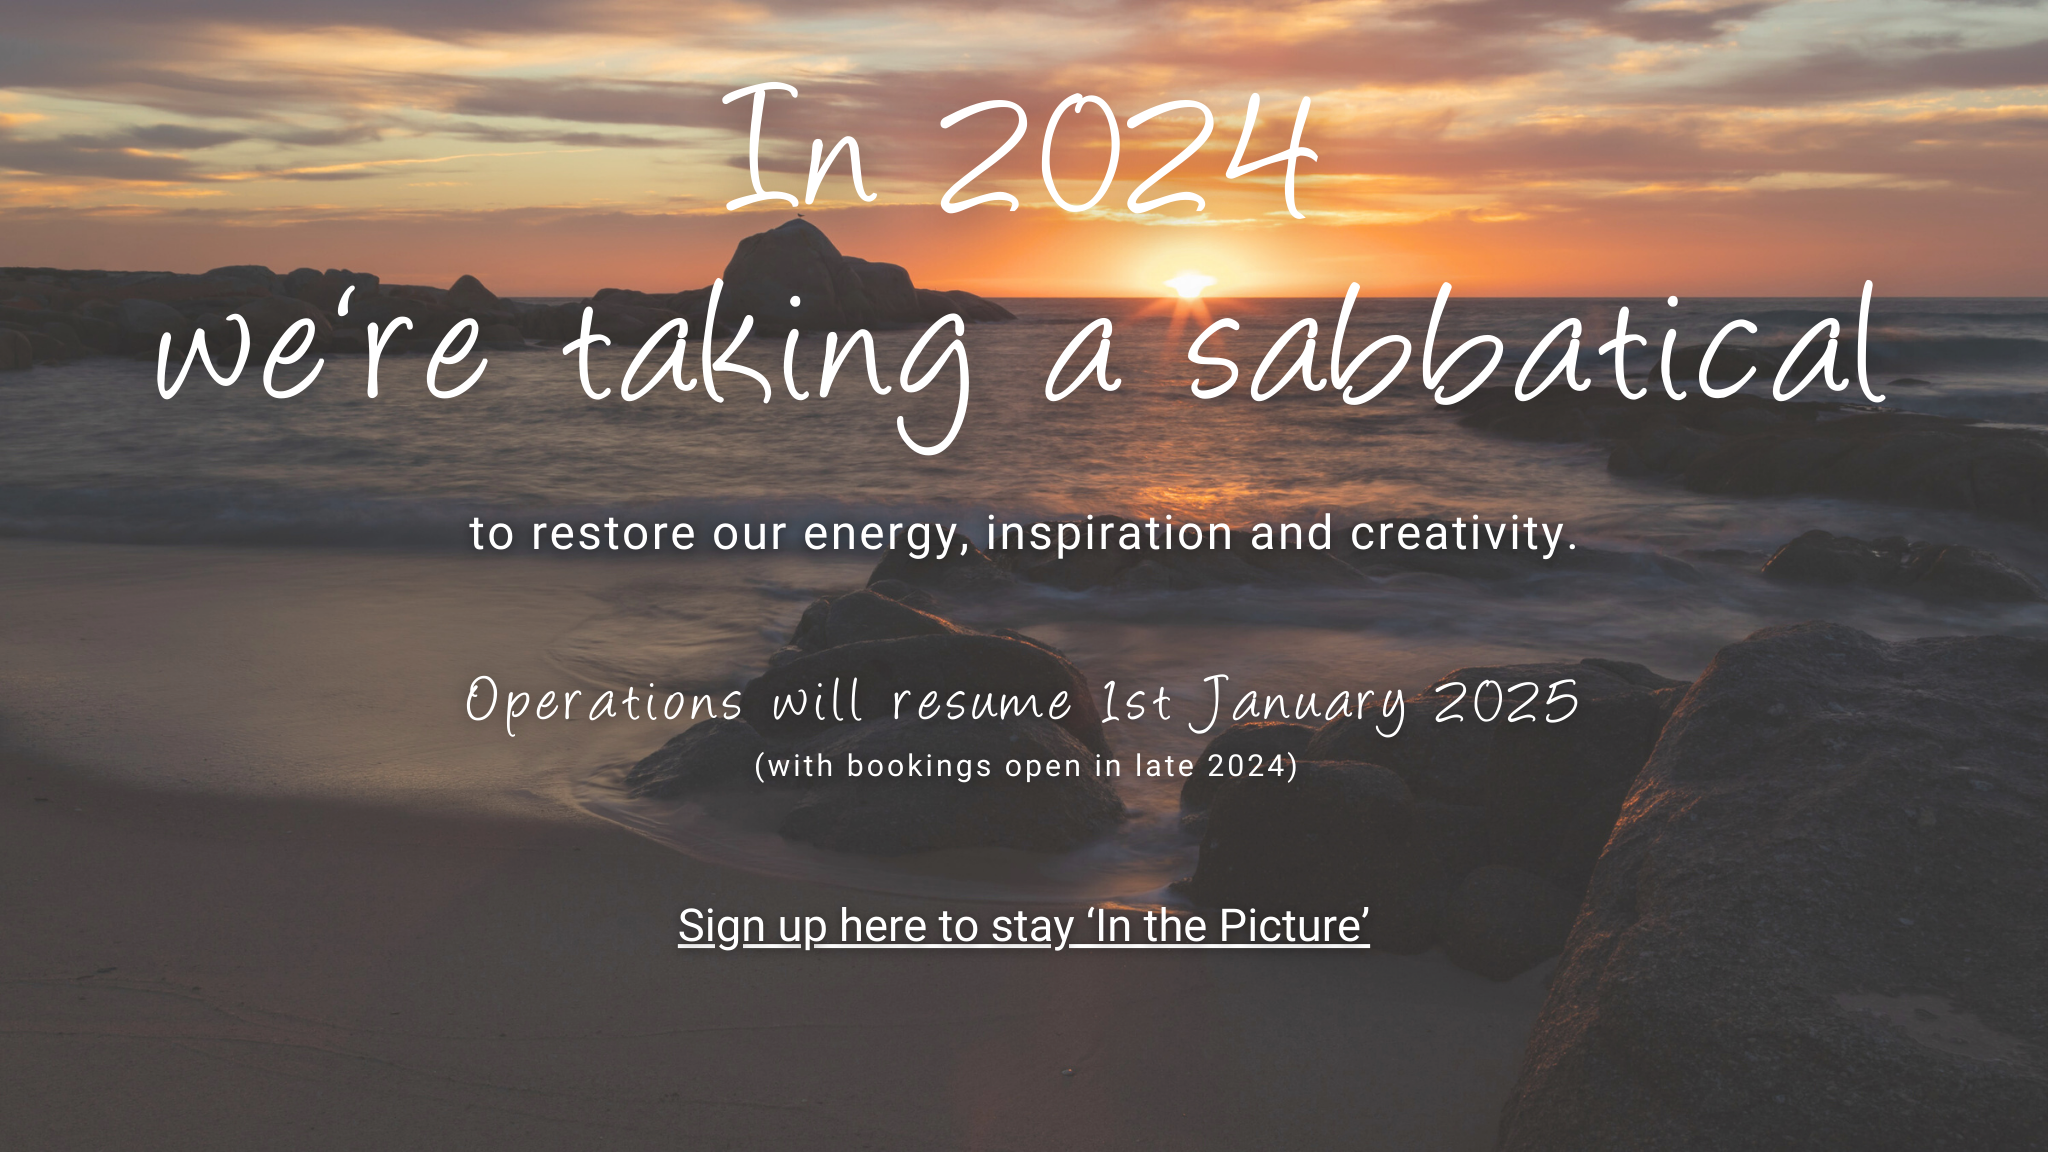 Announcement - Shutterbug Walkabouts is taking a sabbatical in 2024, to restore energy, inspiration and creativity. We're back in 2025.